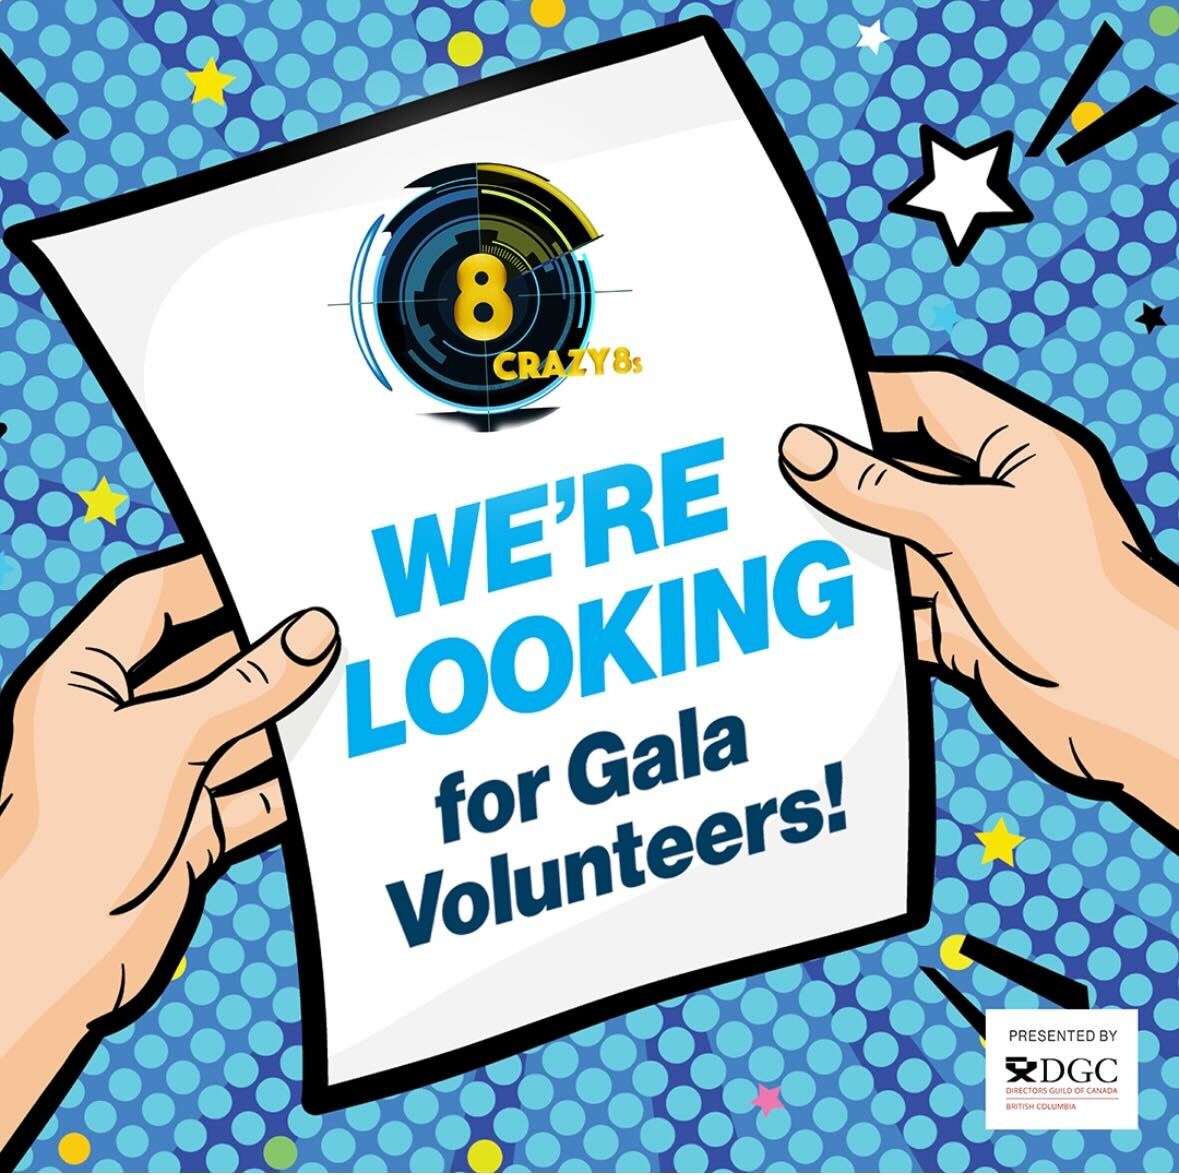 T-minus 4 days until the grand finale of the Crazy8s journey, our Gala Screening + Afterparty 🥳. We’re on the lookout for a few extra hands to join us as volunteers. Shifts run from 10PM-1AM and volunteers will receive a gift card for their support. More: docs.google.com/forms/d/e/1FAI…